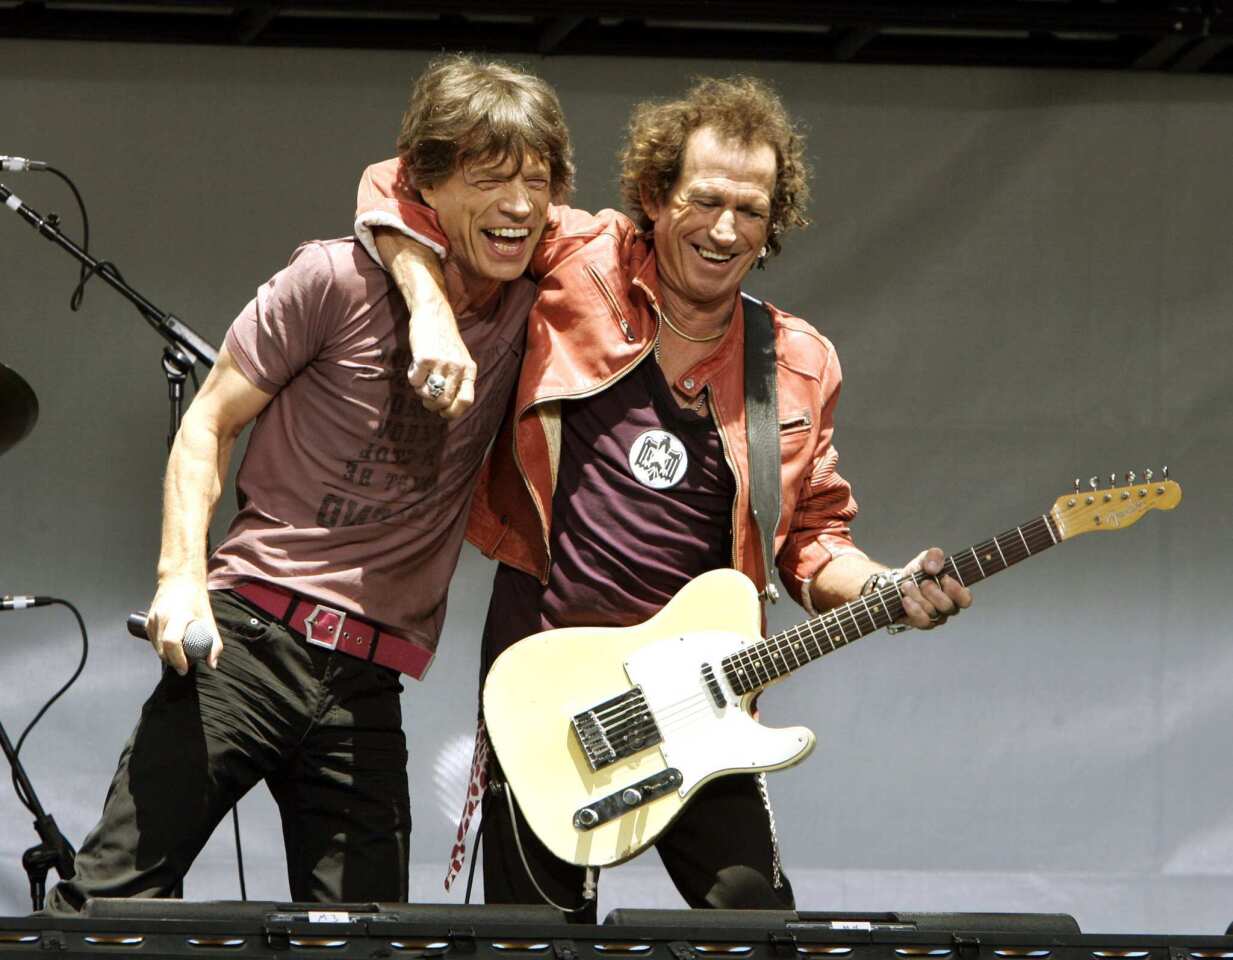 Mick Jagger and Keith Richards embrace in New York while announcing the band's 2005 tour.